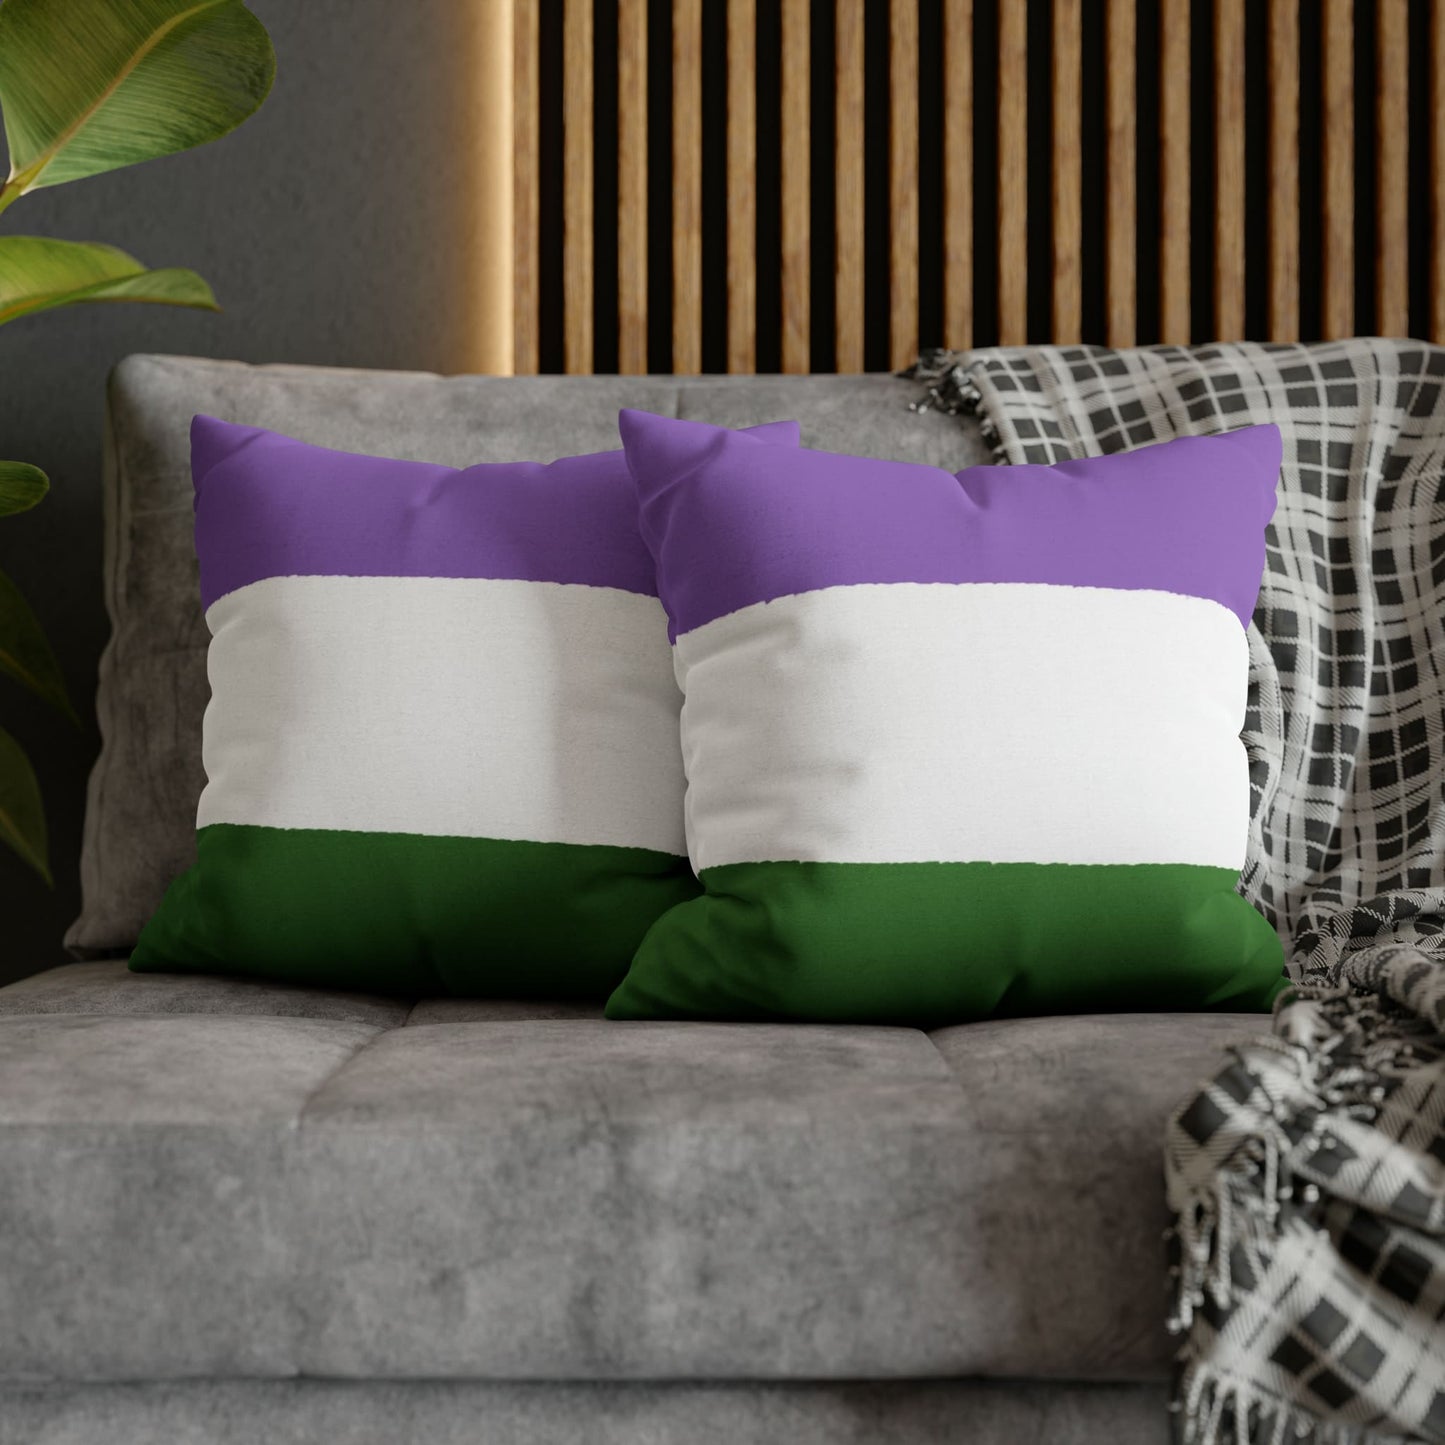 2 genderqueer pillows on couch